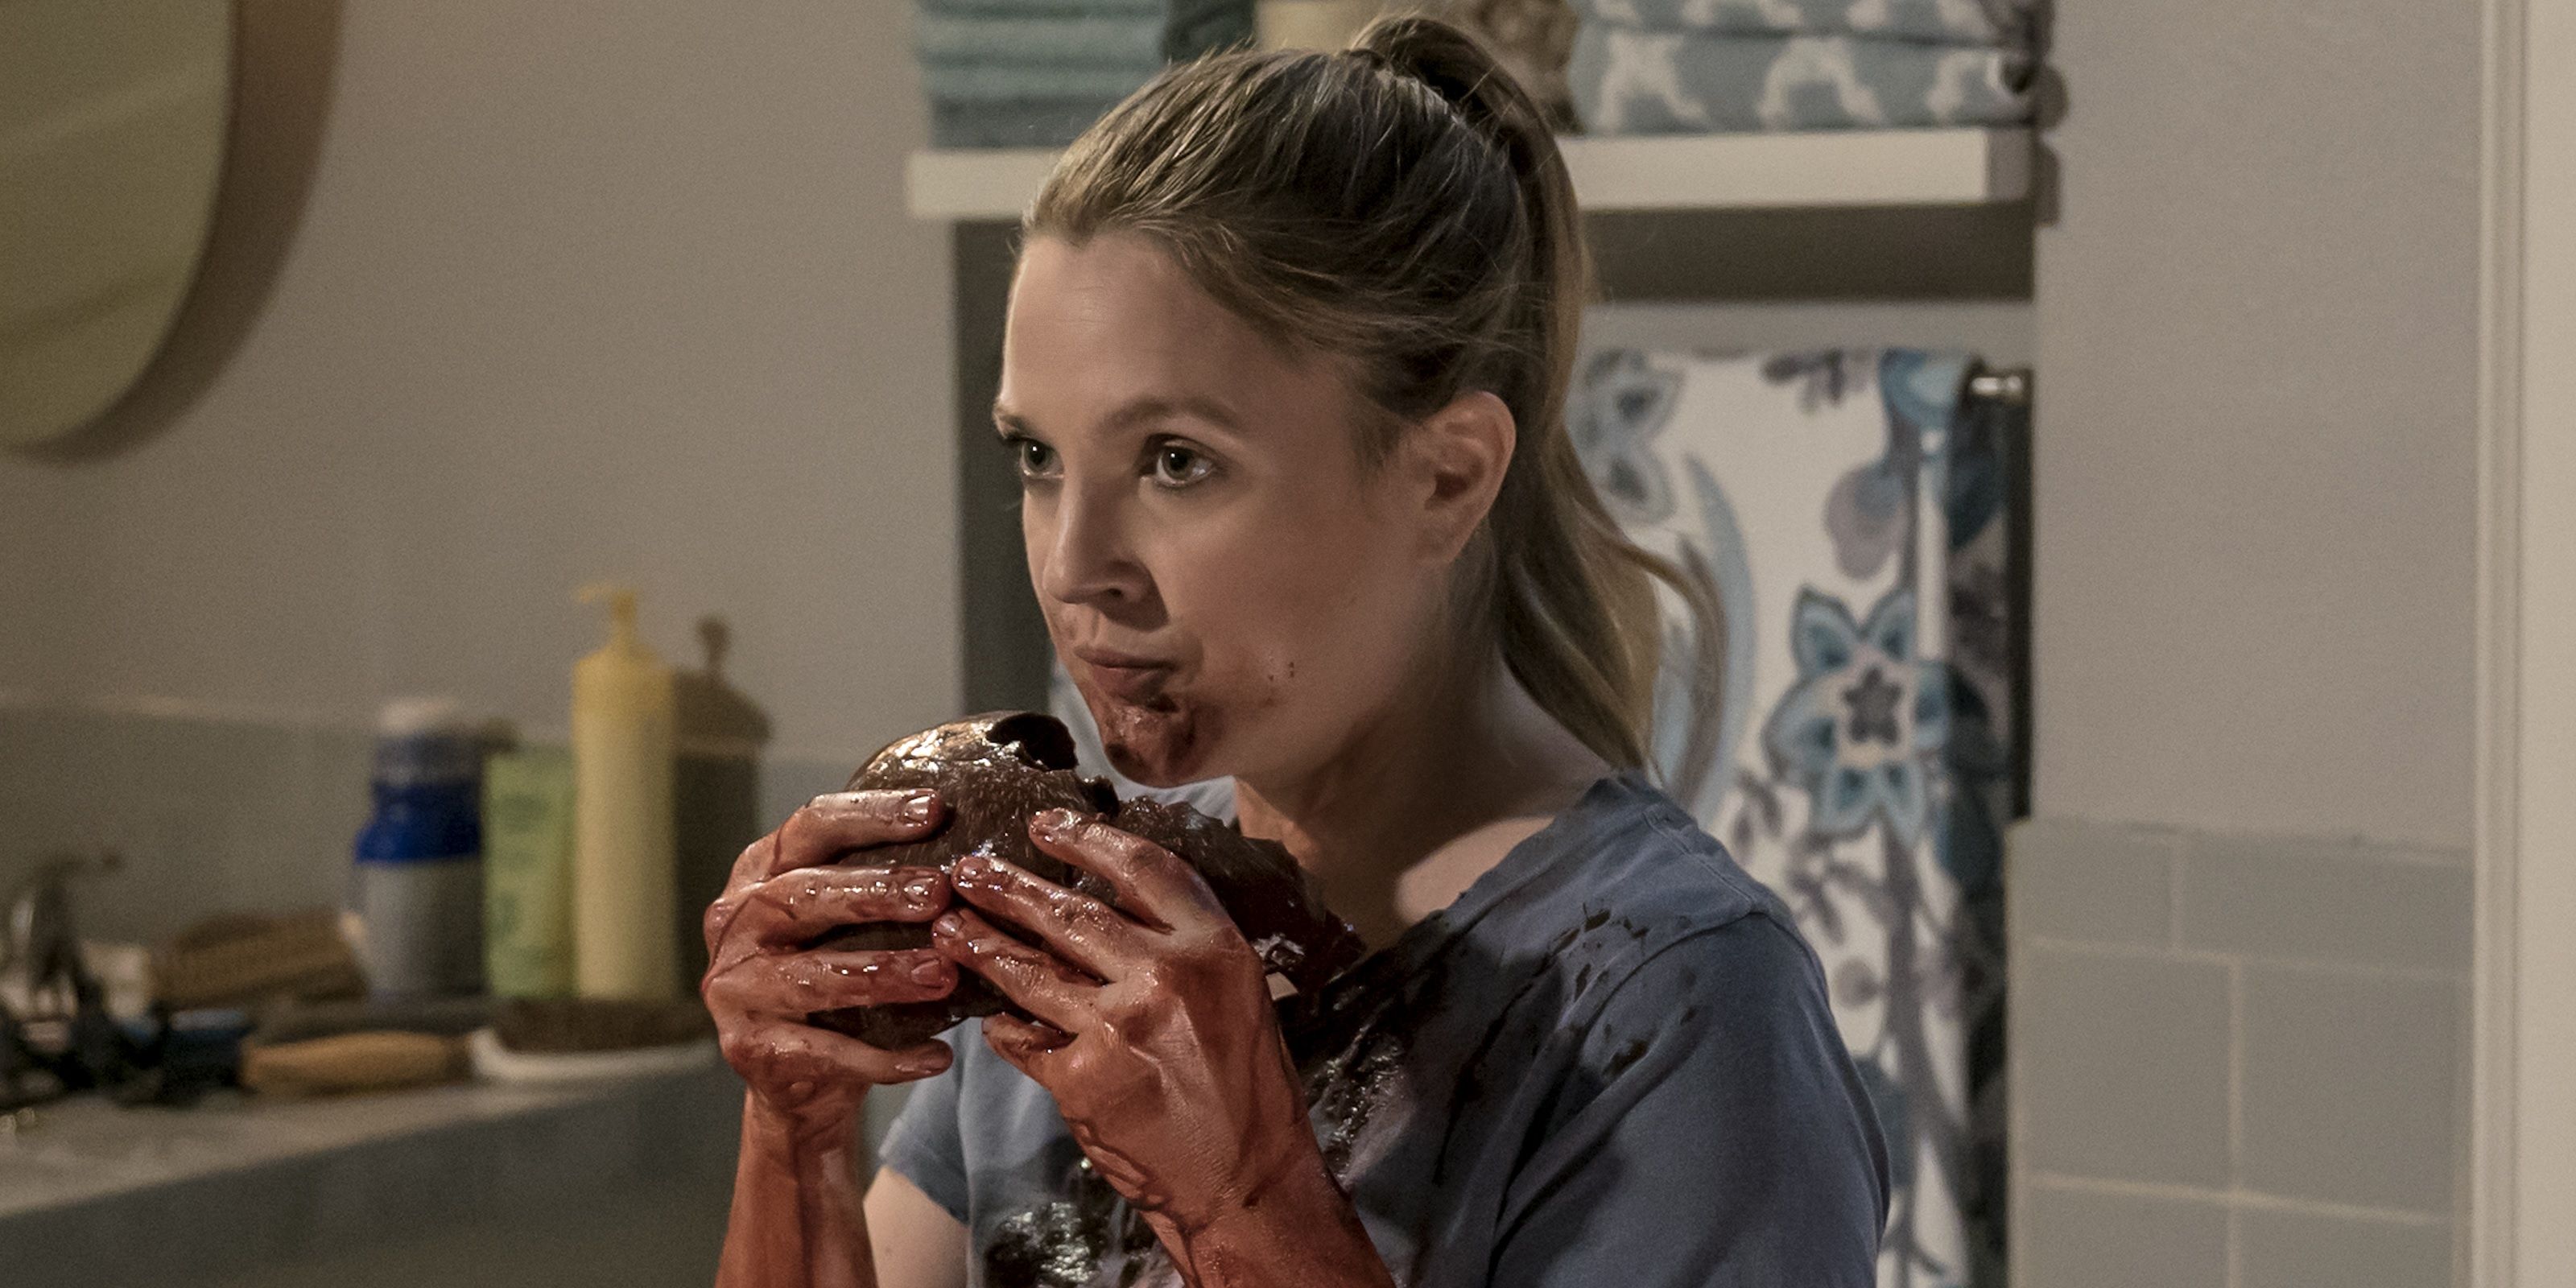 Drew Barrymore in Santa Clarita Diet, eating something with blood all over her hands.